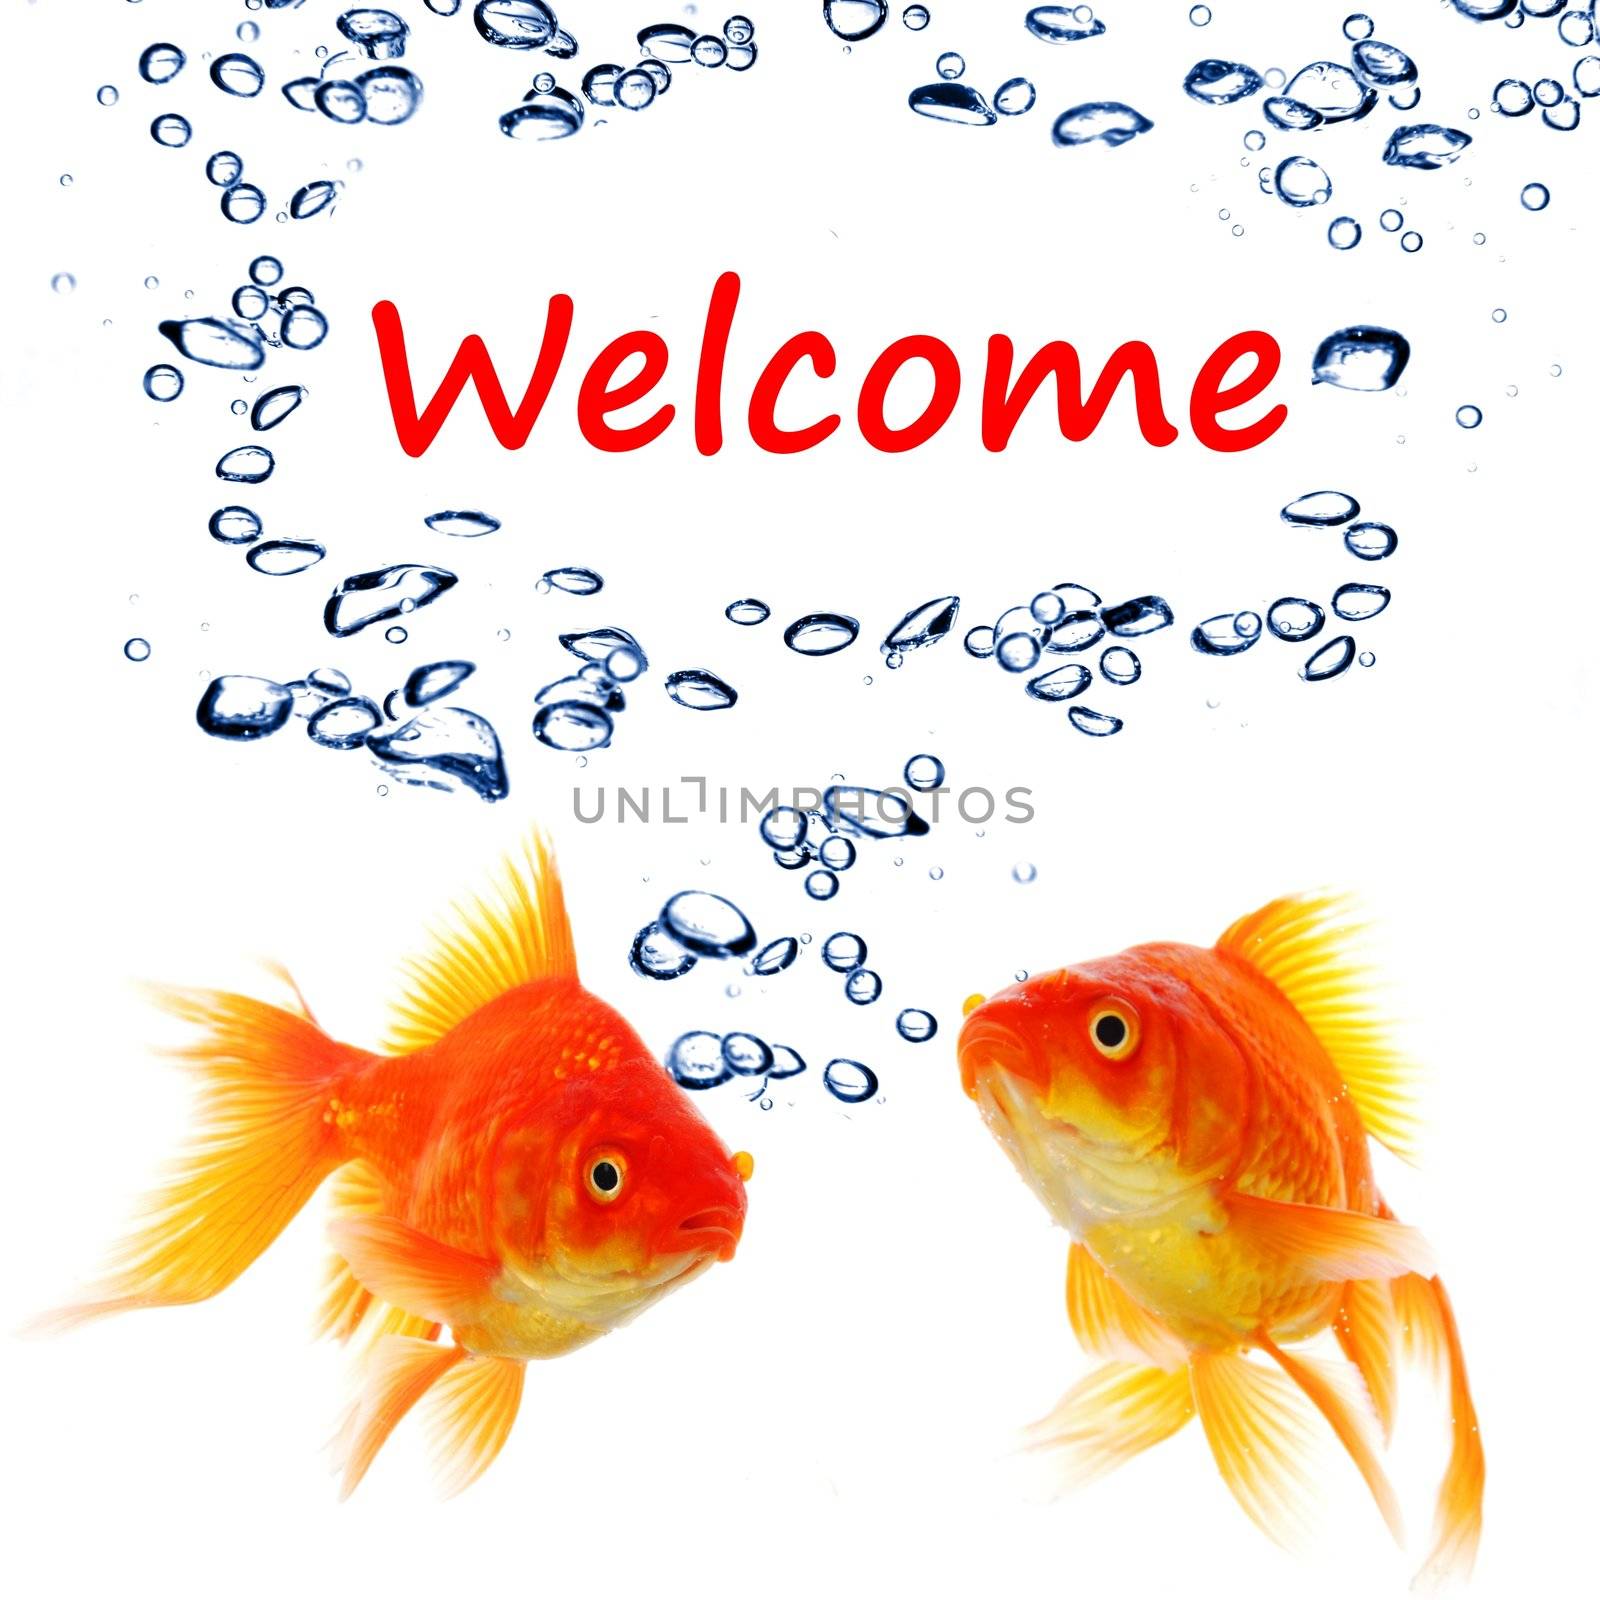 welcome concept with word and goldfish on white